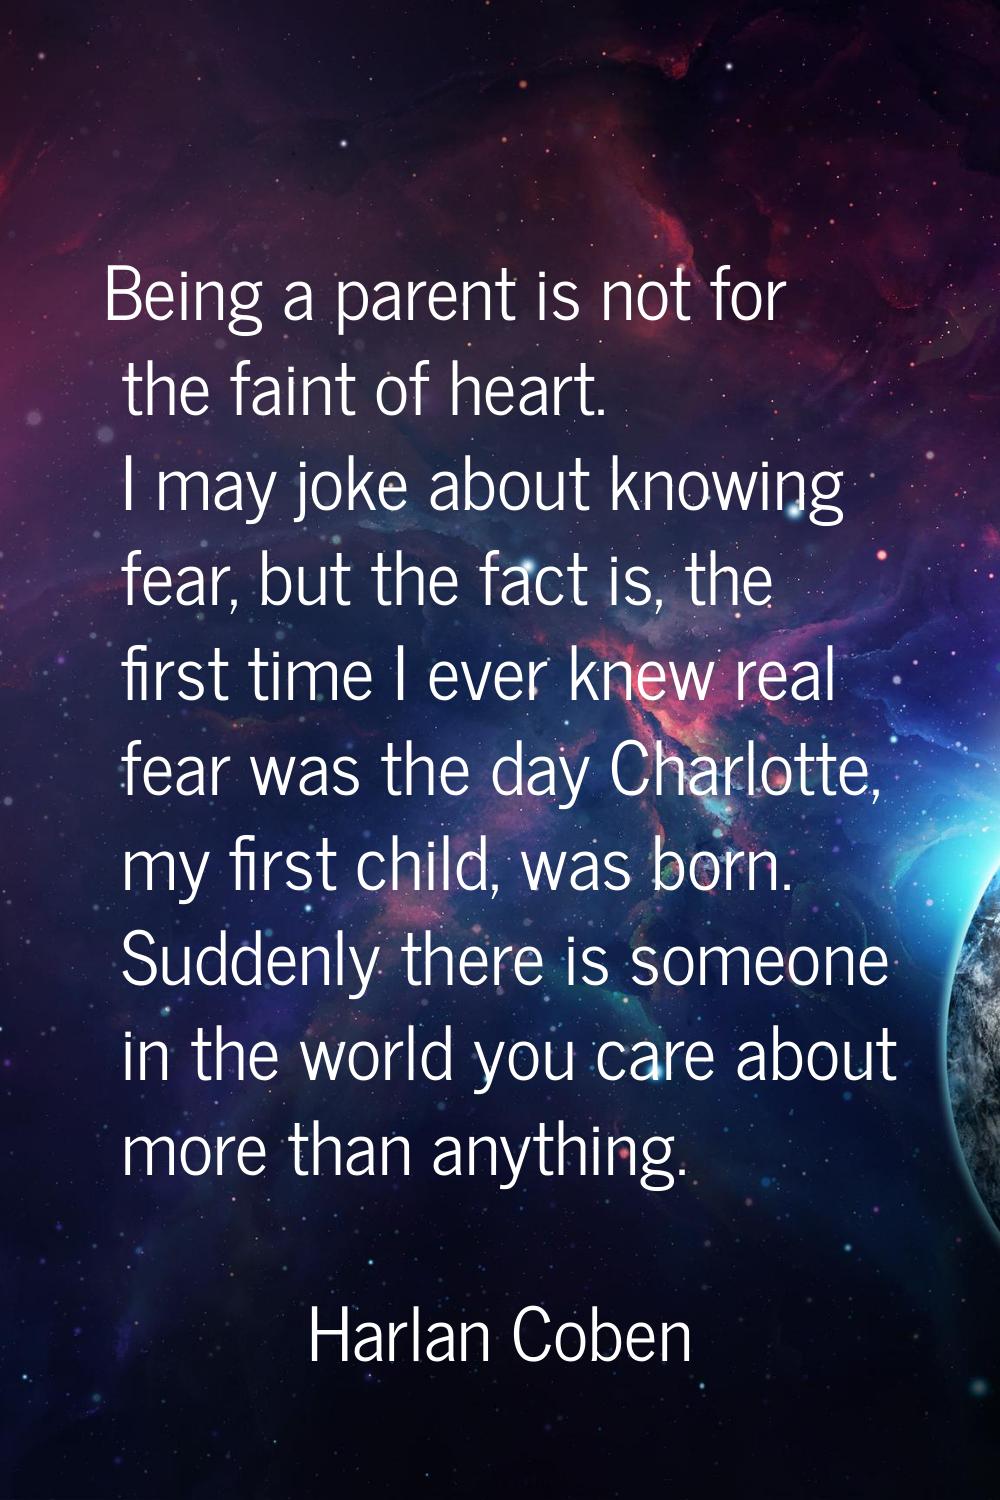 Being a parent is not for the faint of heart. I may joke about knowing fear, but the fact is, the f